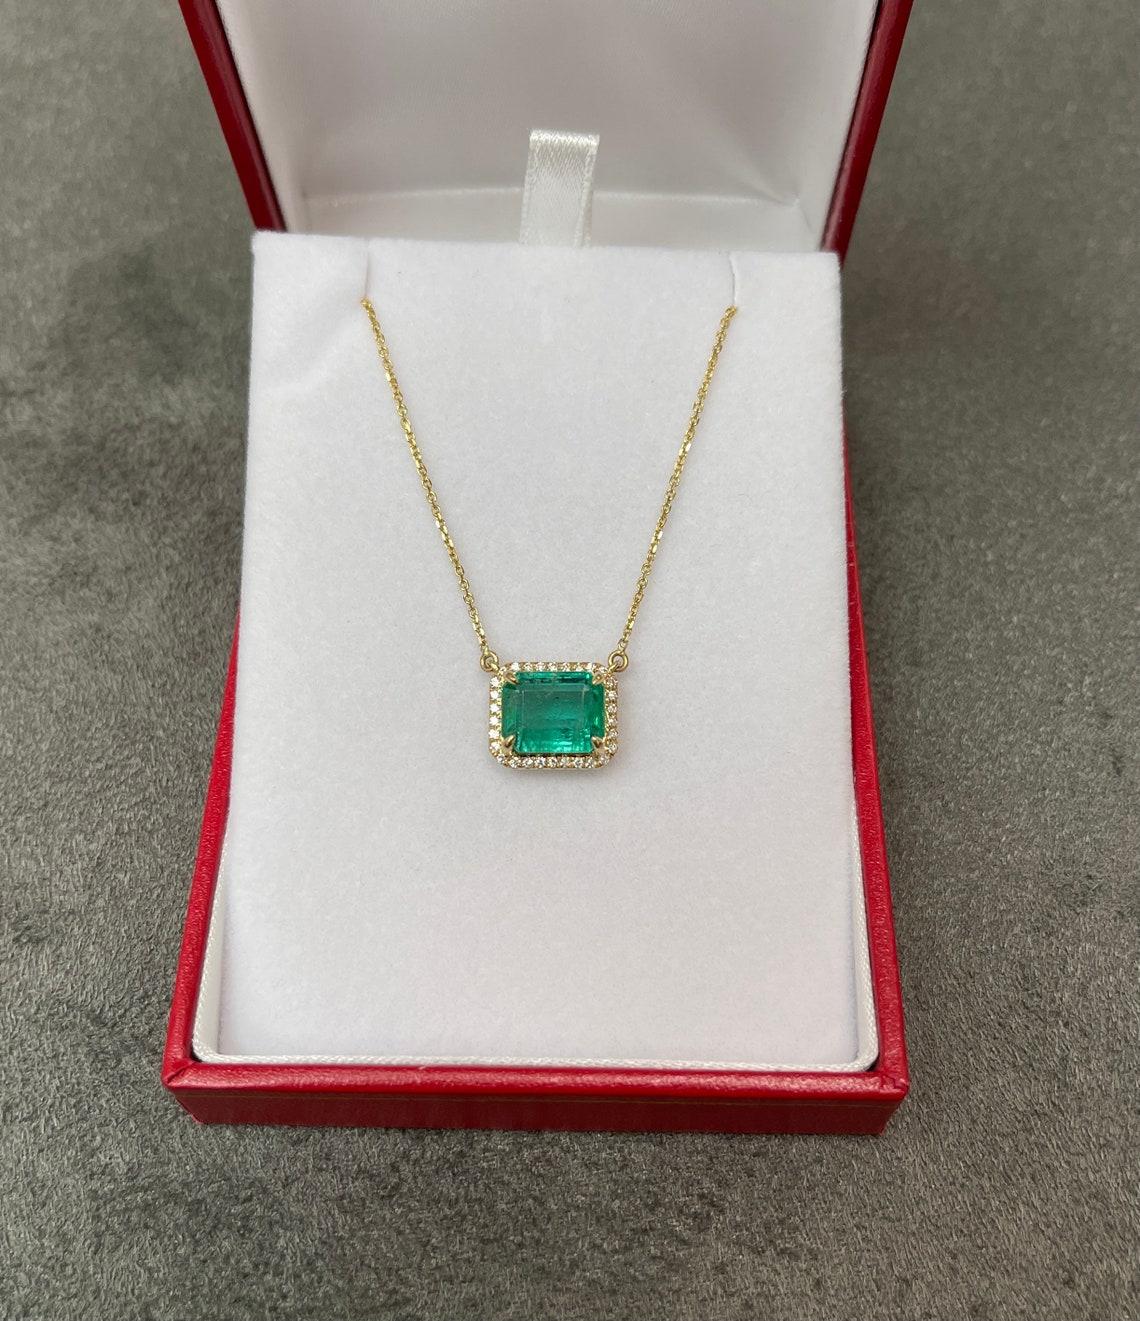 Featured here is a stunning statement size East to West rich bluish green emerald and round diamond halo necklace handmade in fine 14K yellow gold. Displayed is a lustrous, medium rich green with very good transparency, accented by a simple secure